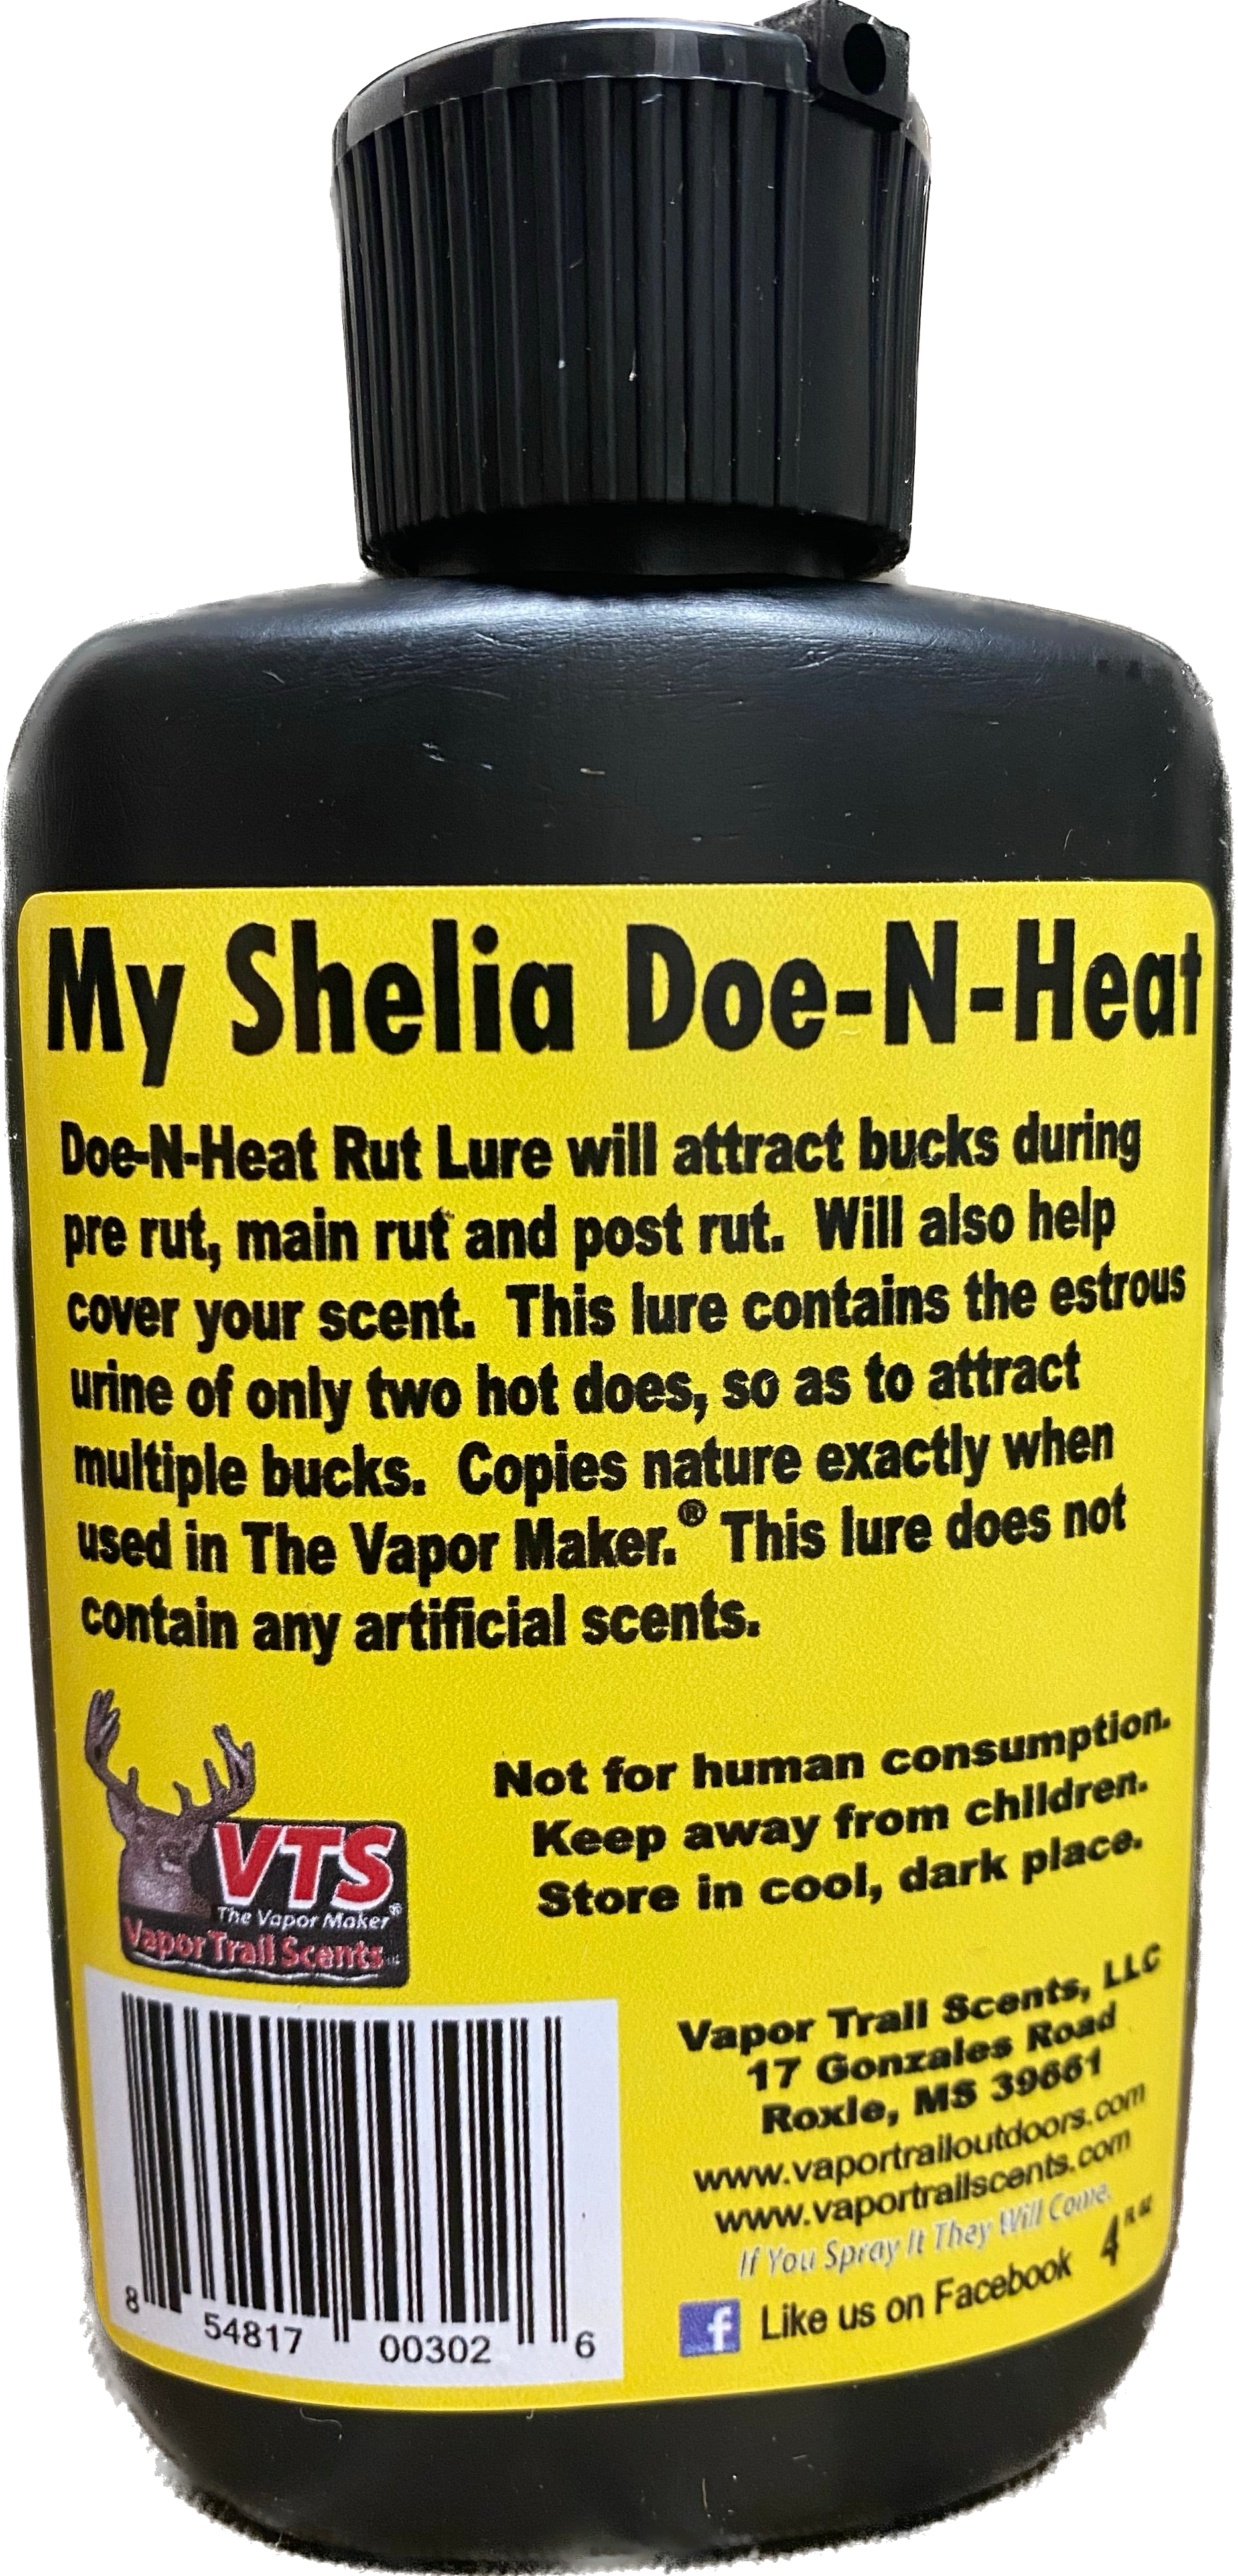 My Shelia Doe-N-Heat - All Natural Deer Attractant - Vapor Trail Scents